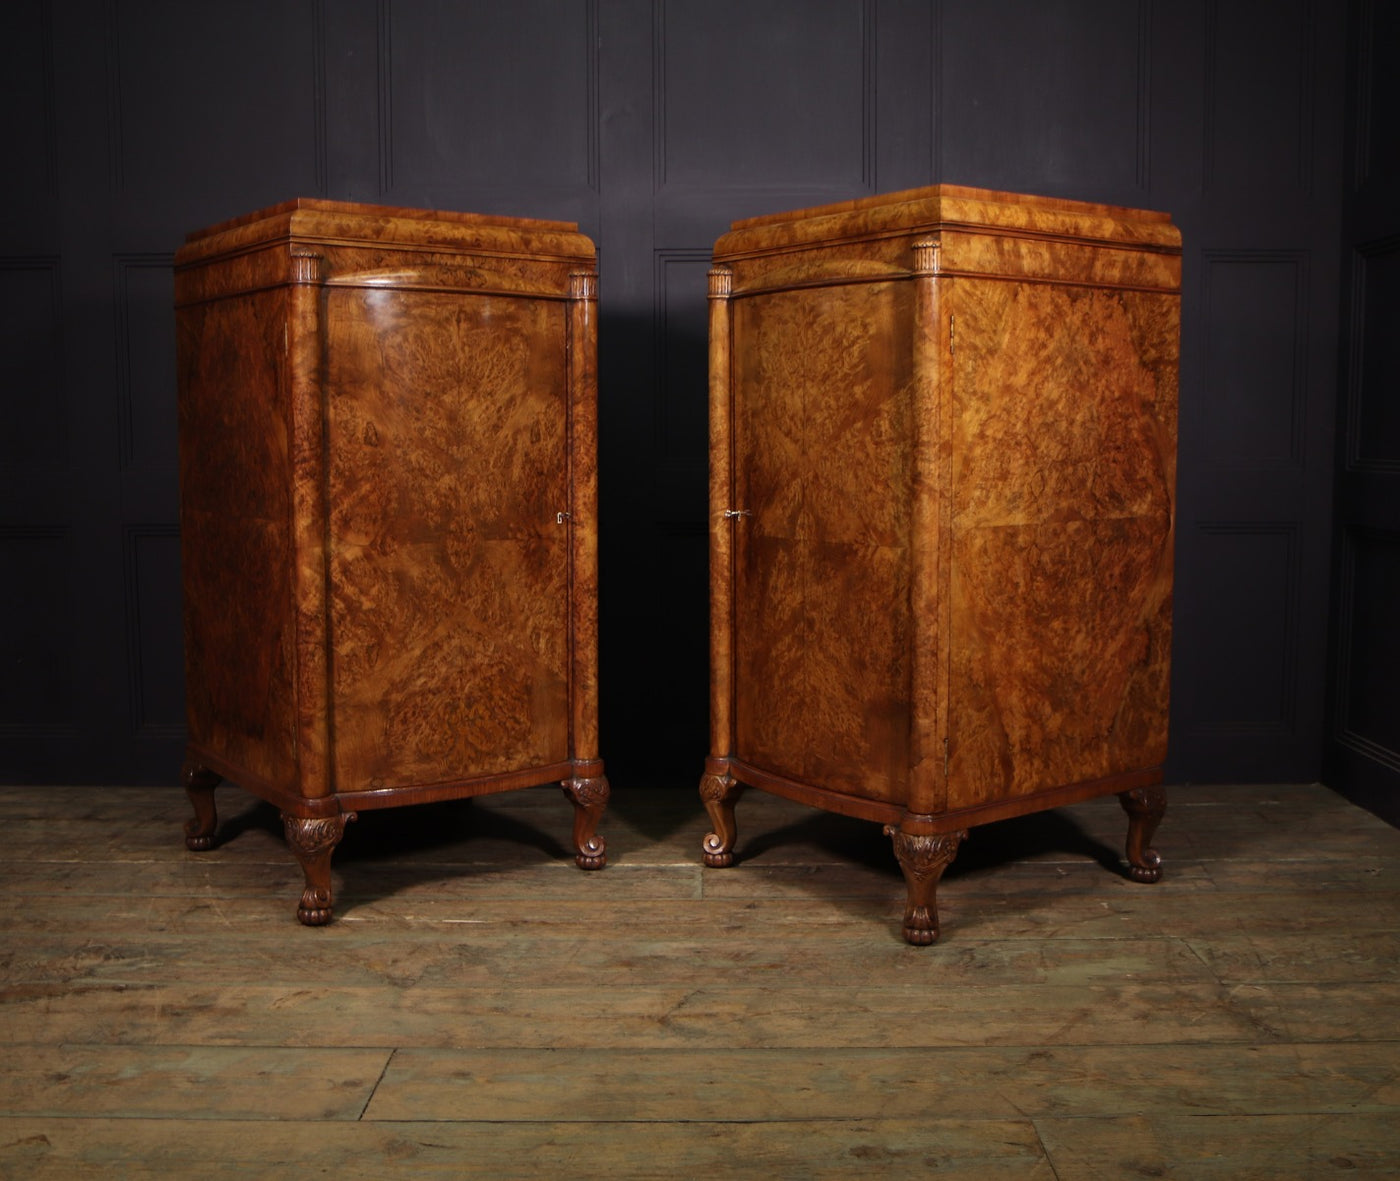 Pair of Large Art Deco Side Cabinets in Burr Walnut